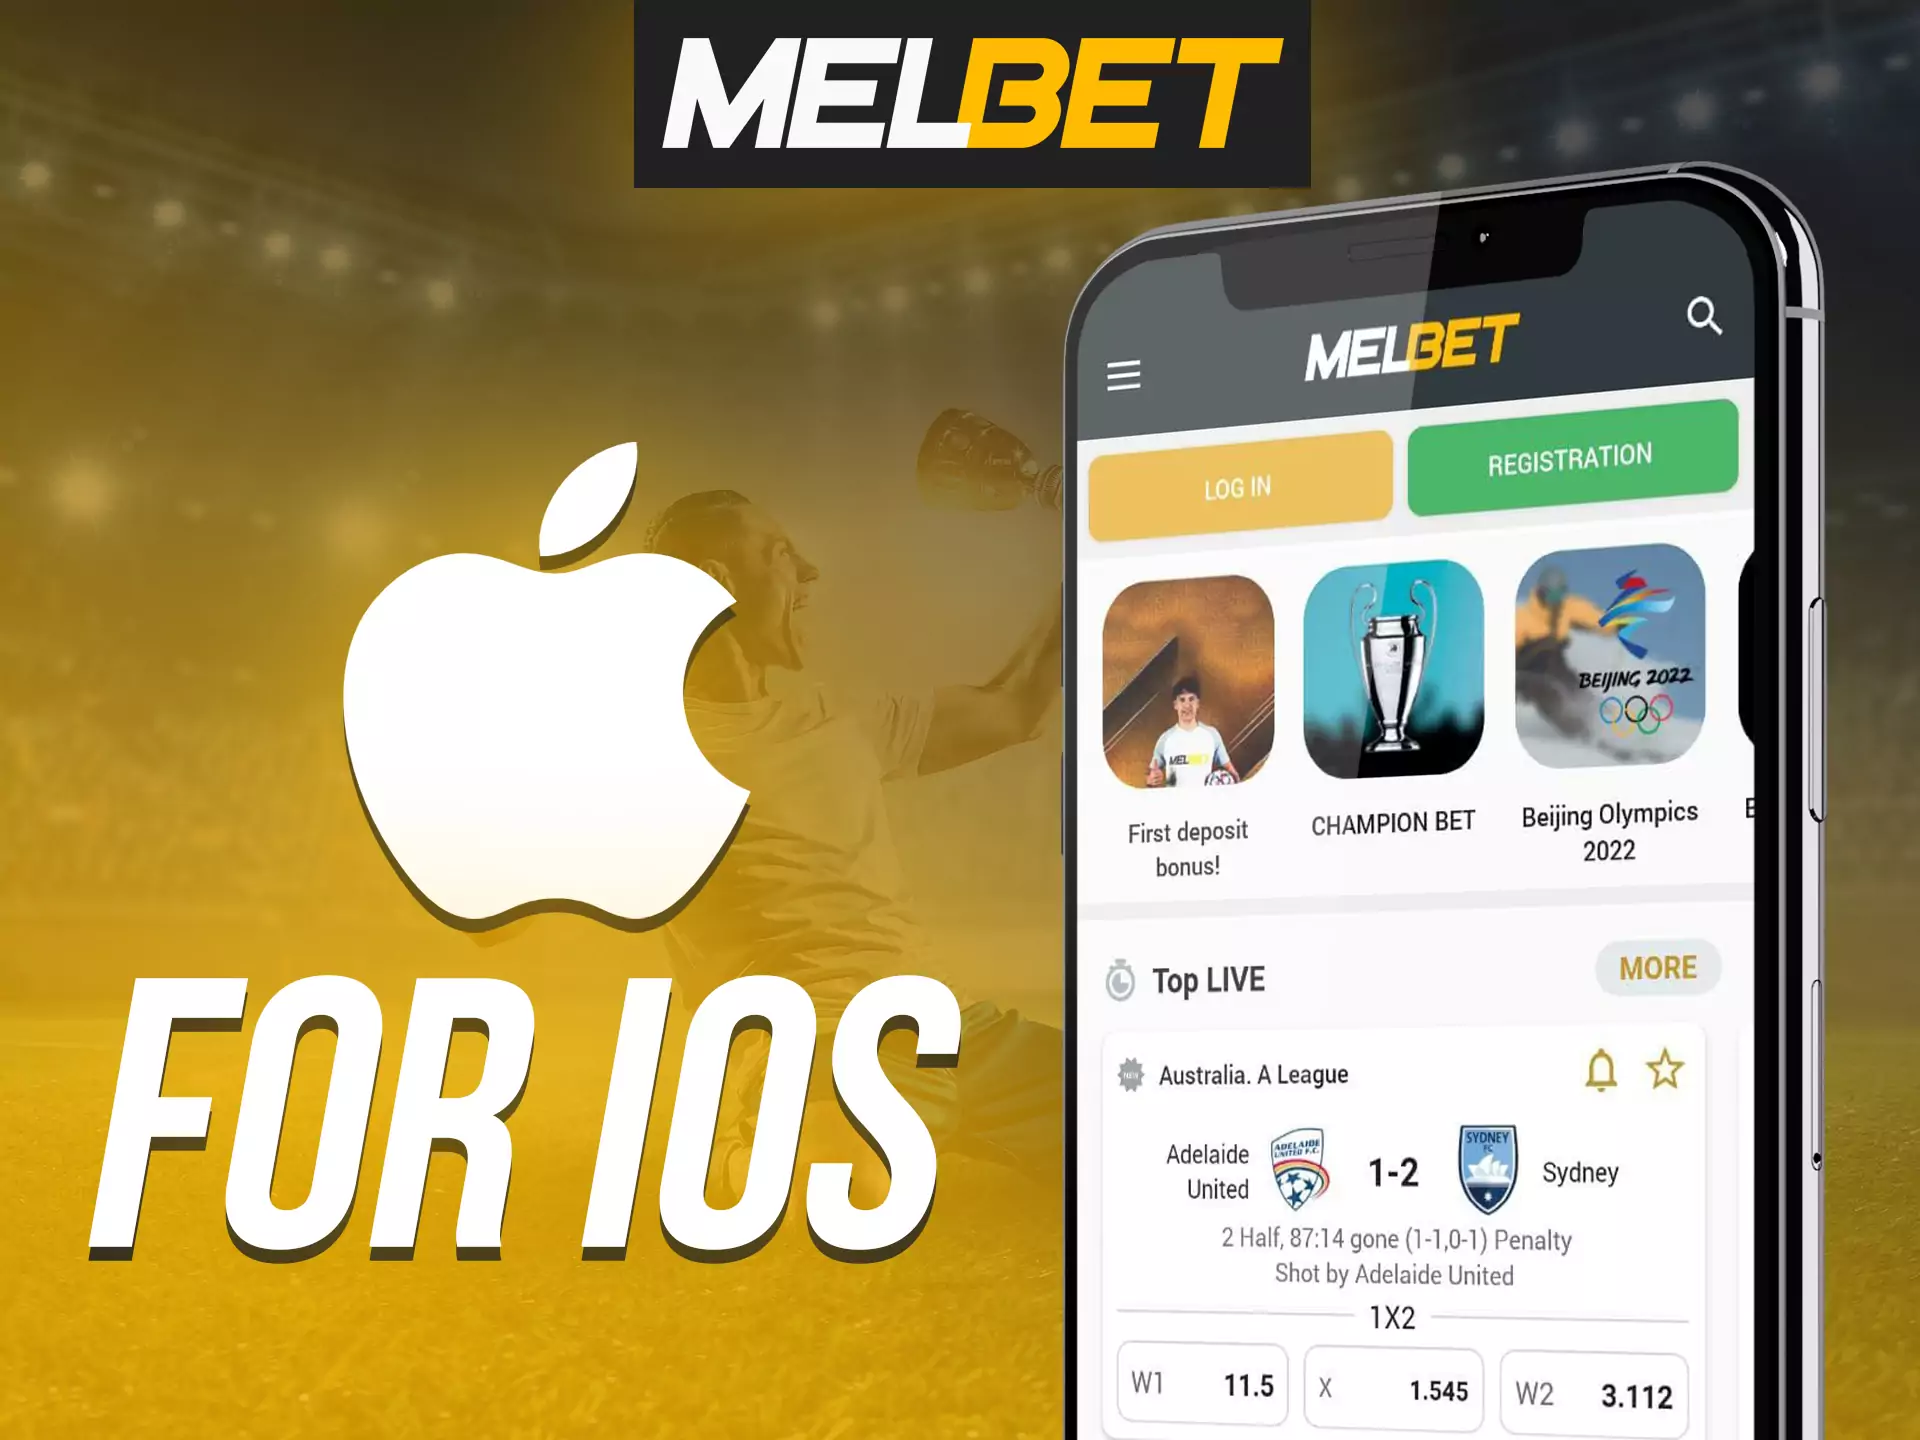 You can install Melbet app on any of your iOS device.